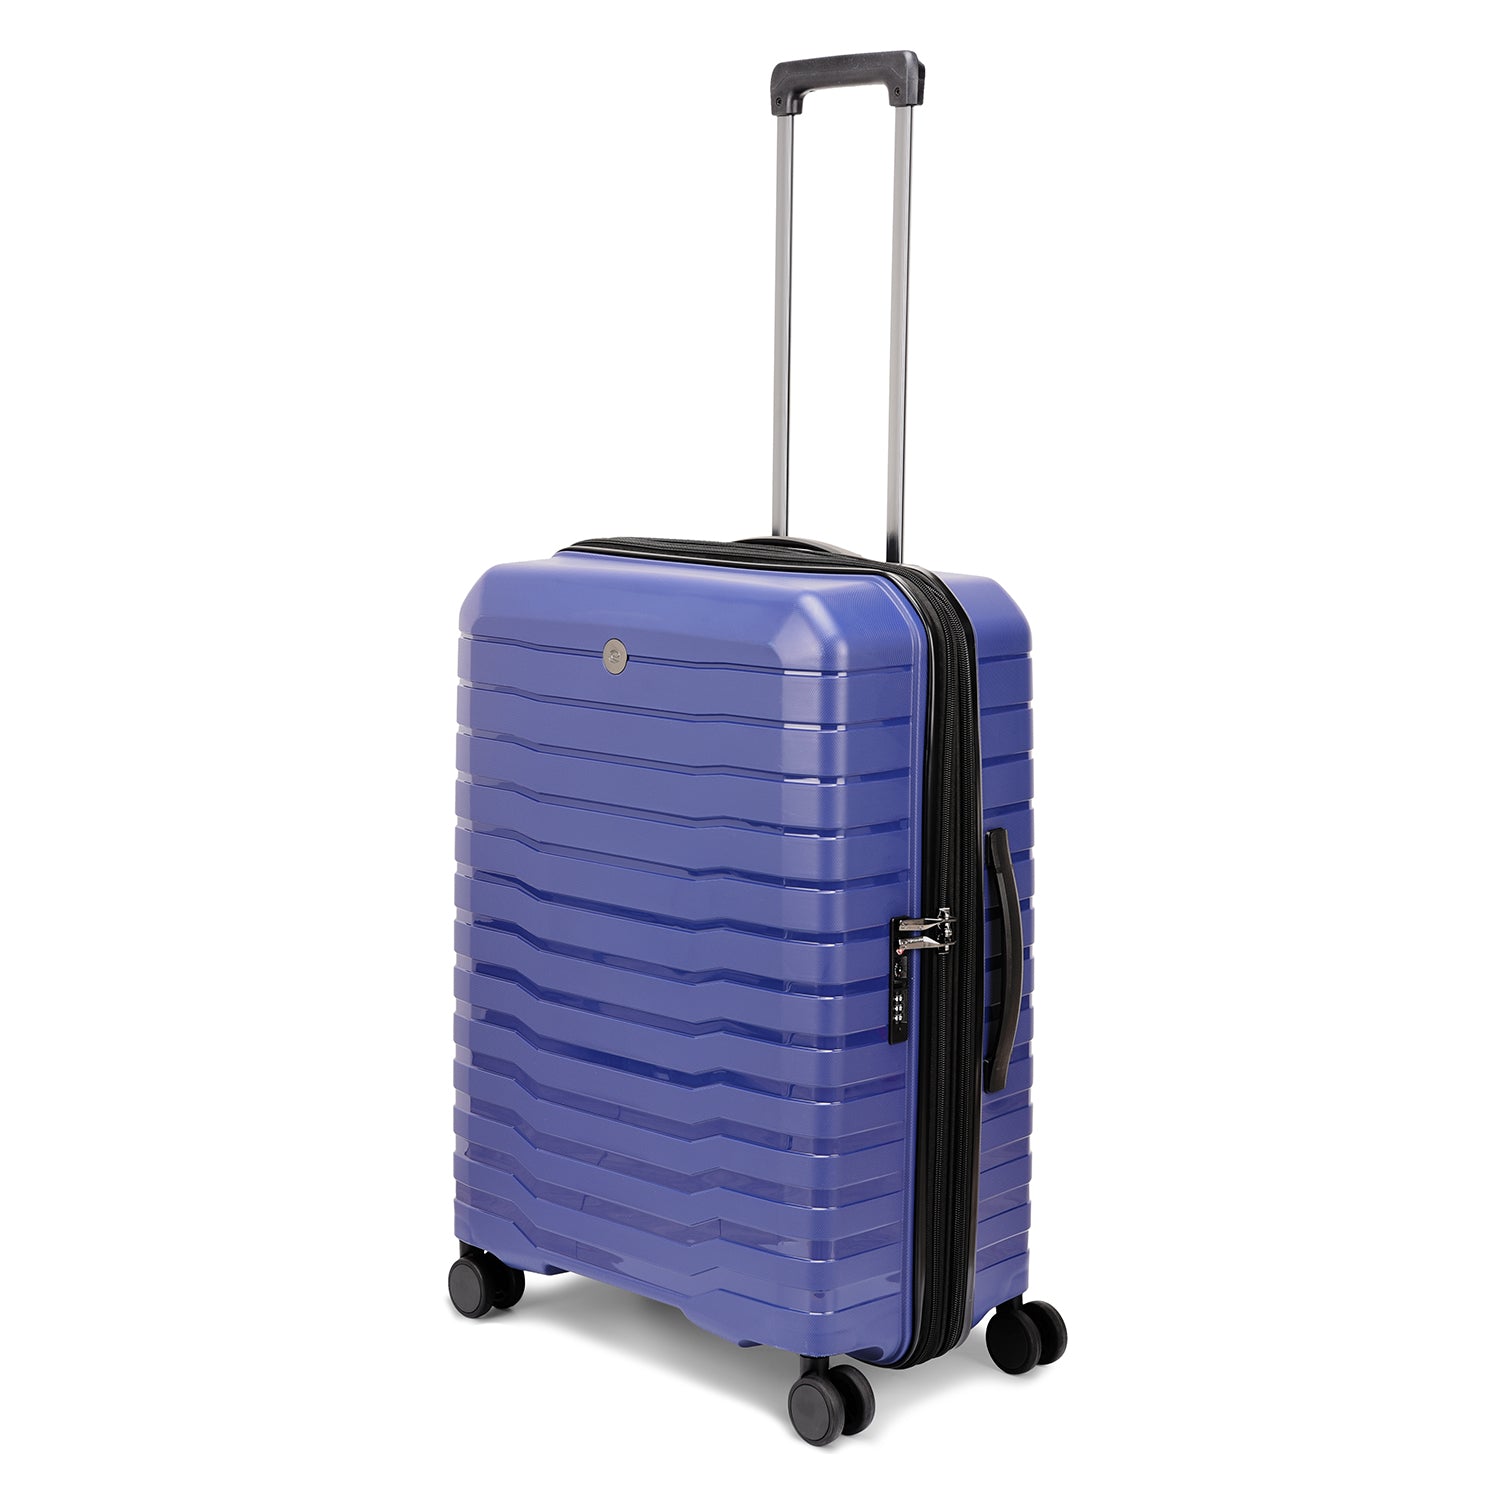 Echolac Lordnorth 68cm Hardcase Expandable 4 Double Wheel Check-In Luggage Trolley Turkish Tile - PPT008 - 24 TURKISH TILE